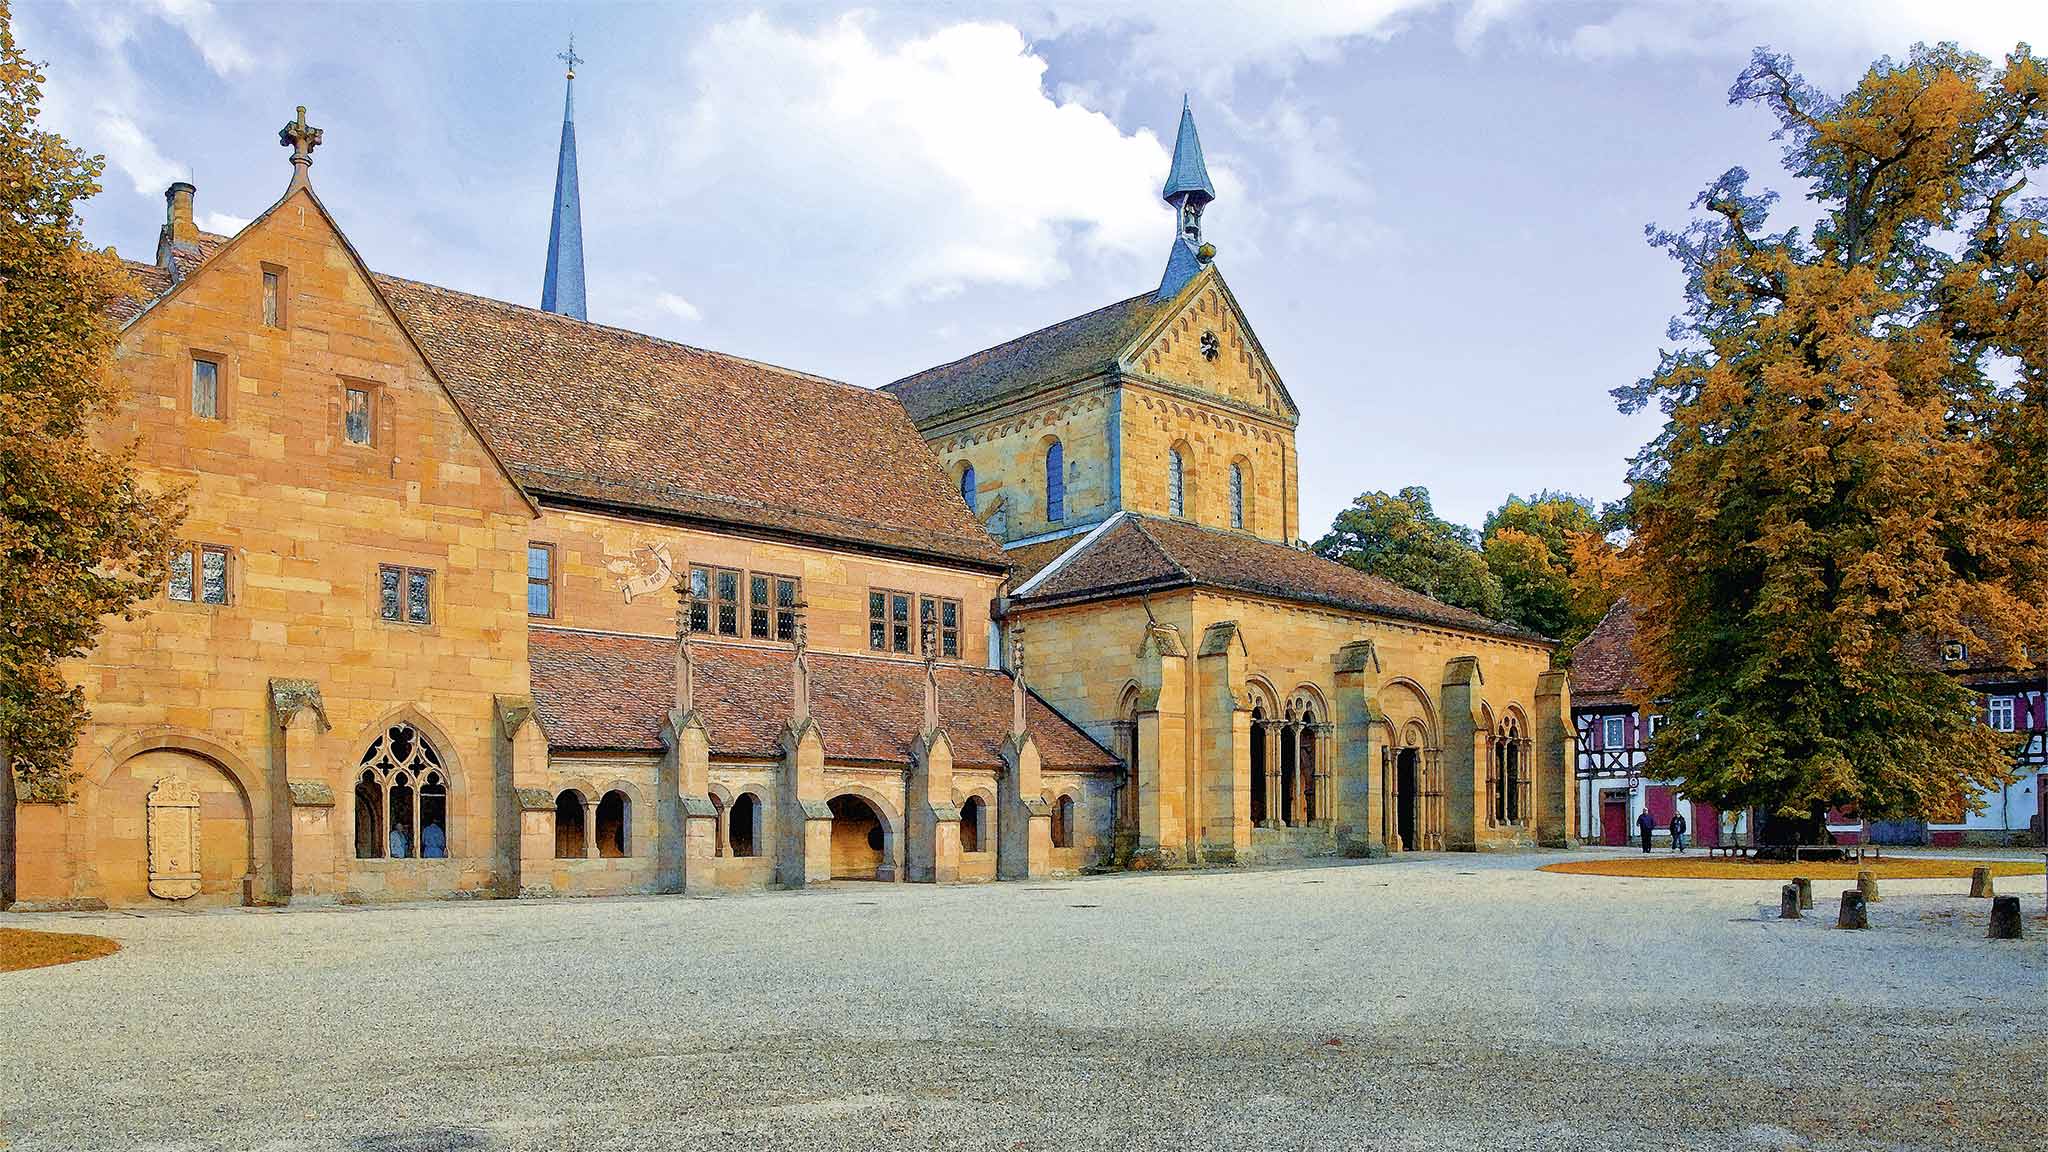 Maulbronn Monastery Edition - A Series by Josef-Stefan Kindler and Andreas Otto Grimminger, K&K Verlagsanstalt, Germany